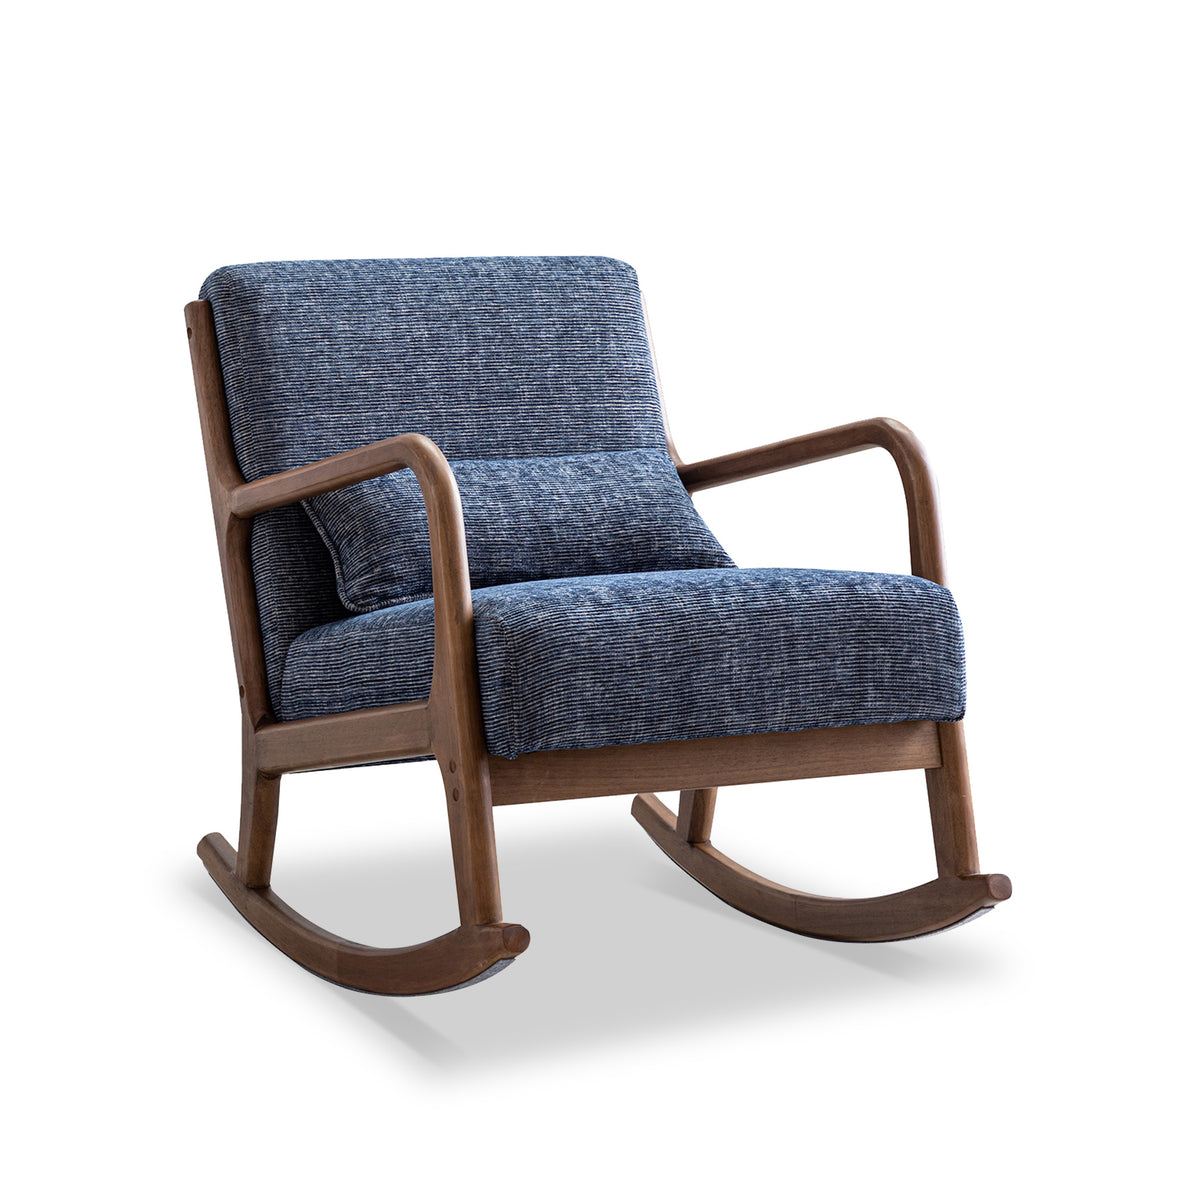 Khali Navy Chenille Rocking Chair from Roseland Furniture